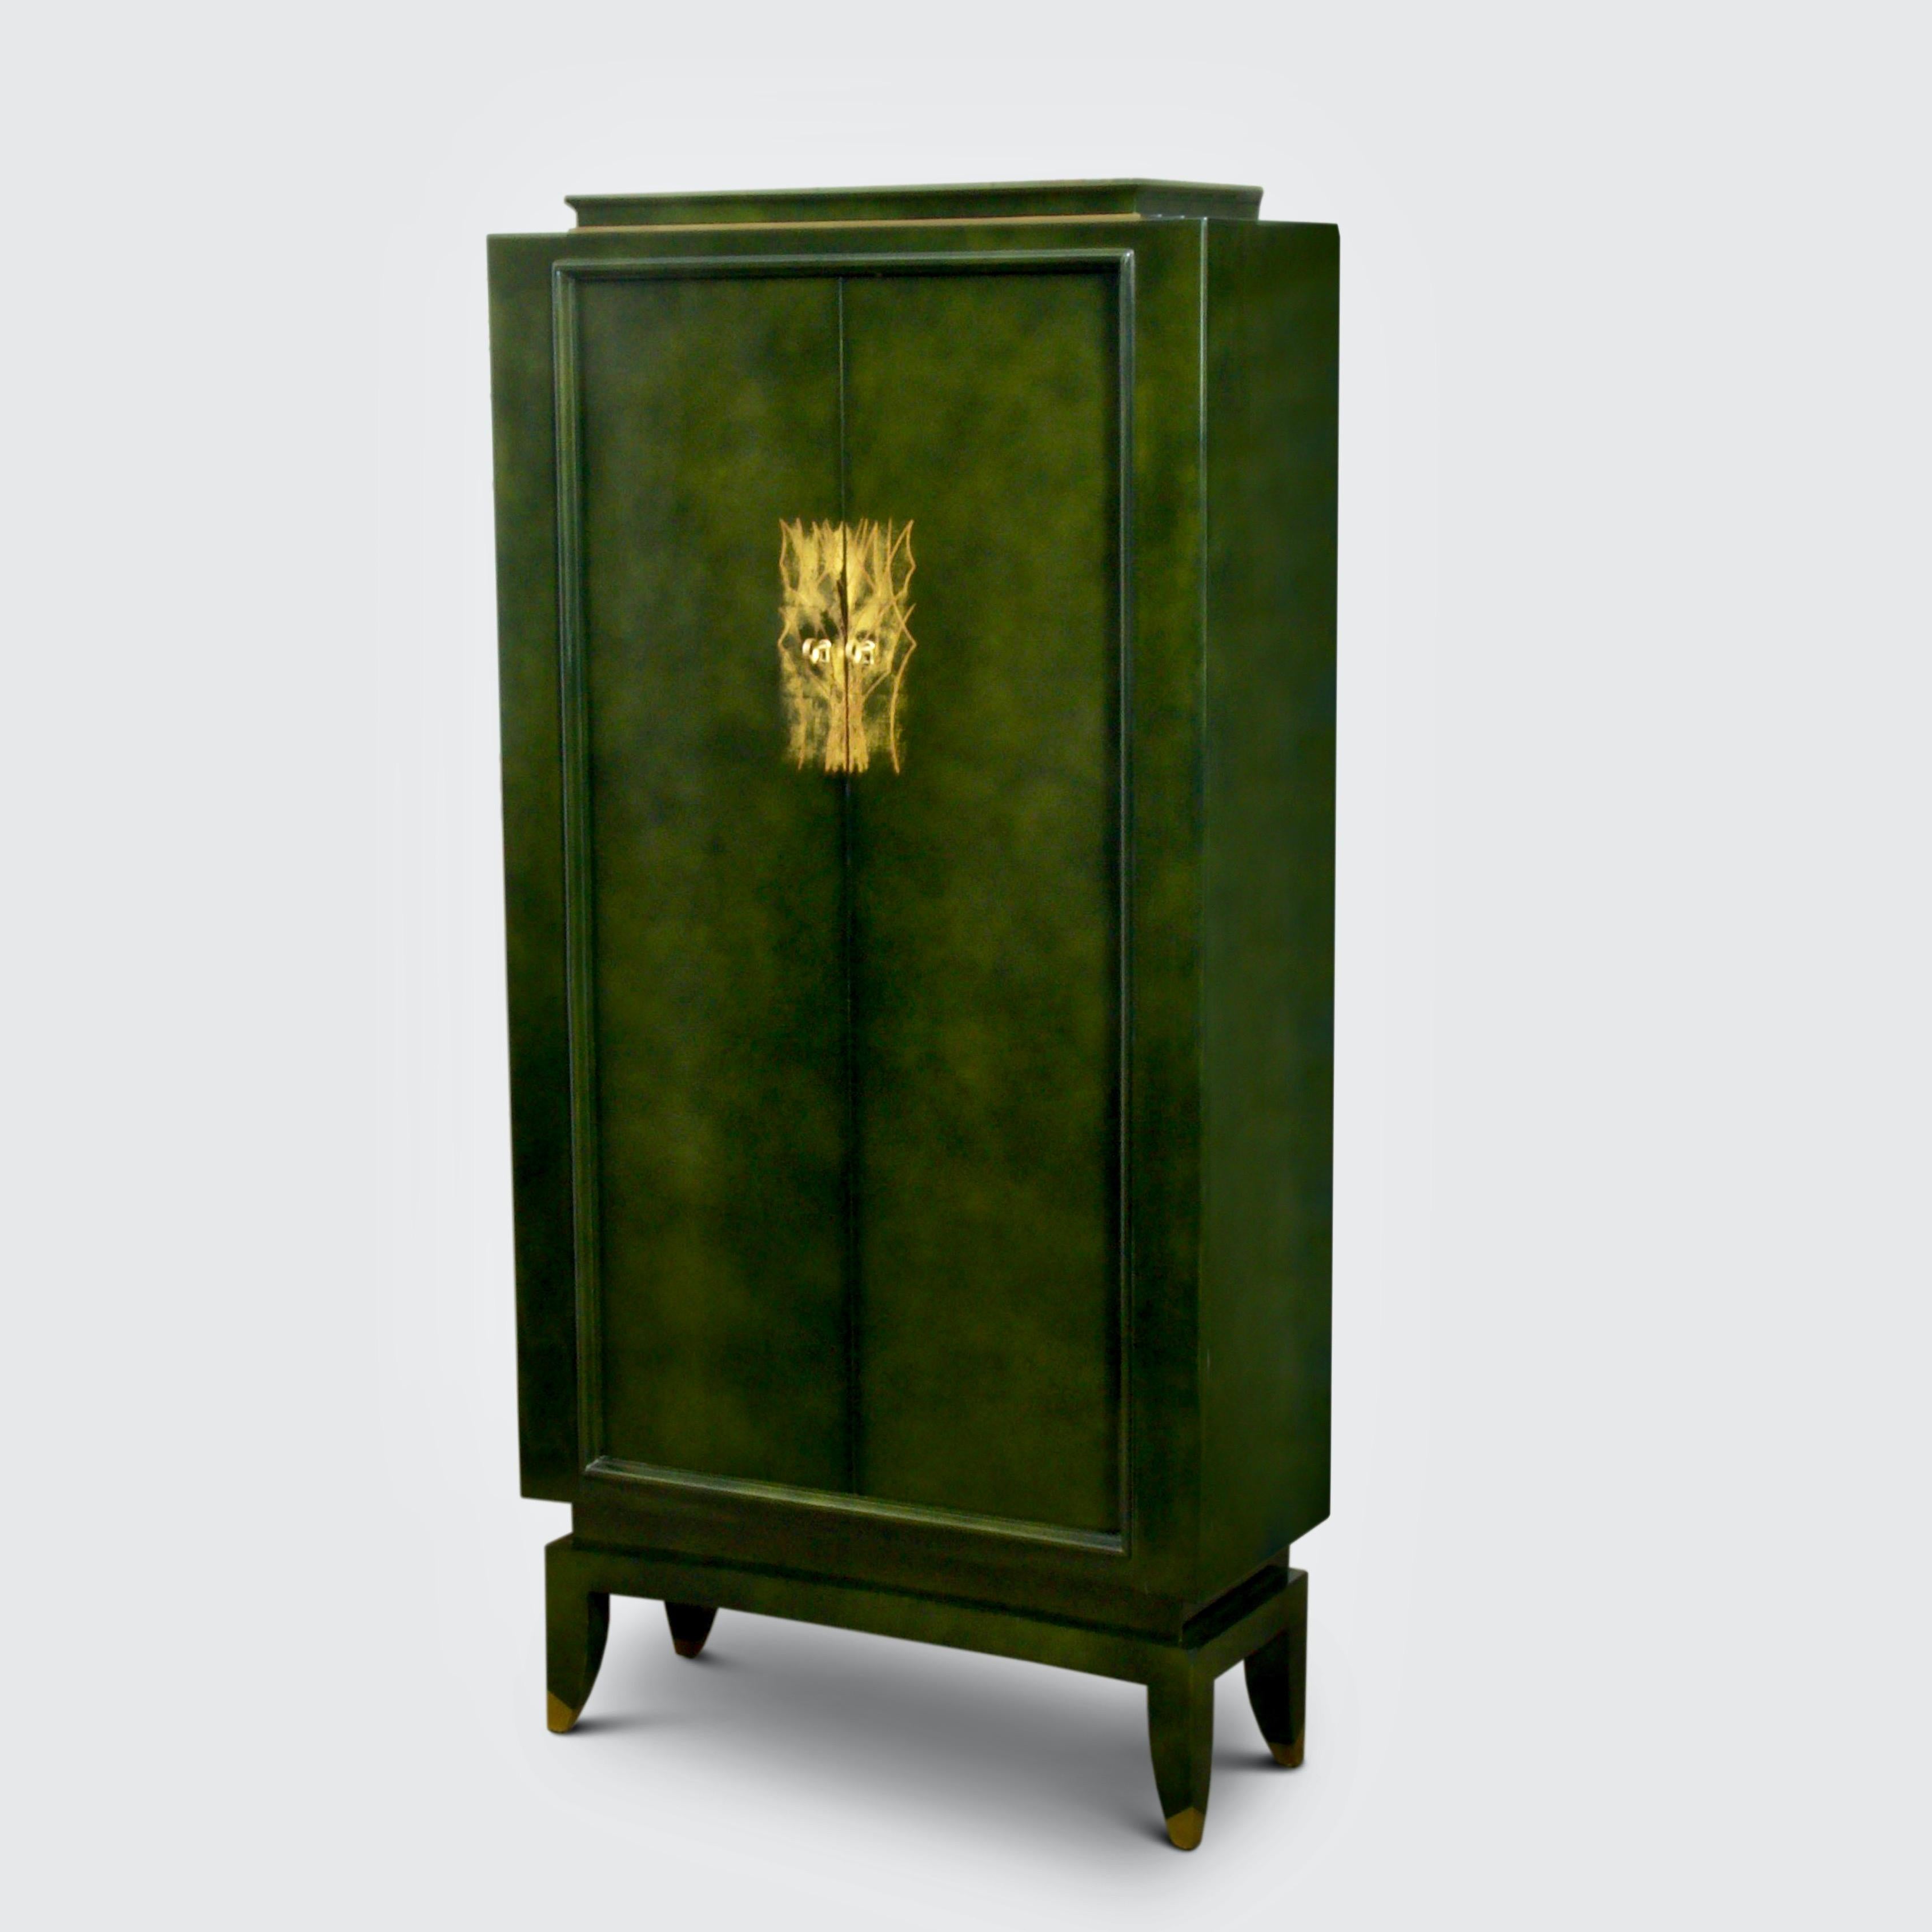 Lacquered Green Lacquer Cabinet by Andre Domin & Marcel Genevriere for Maison Dominique